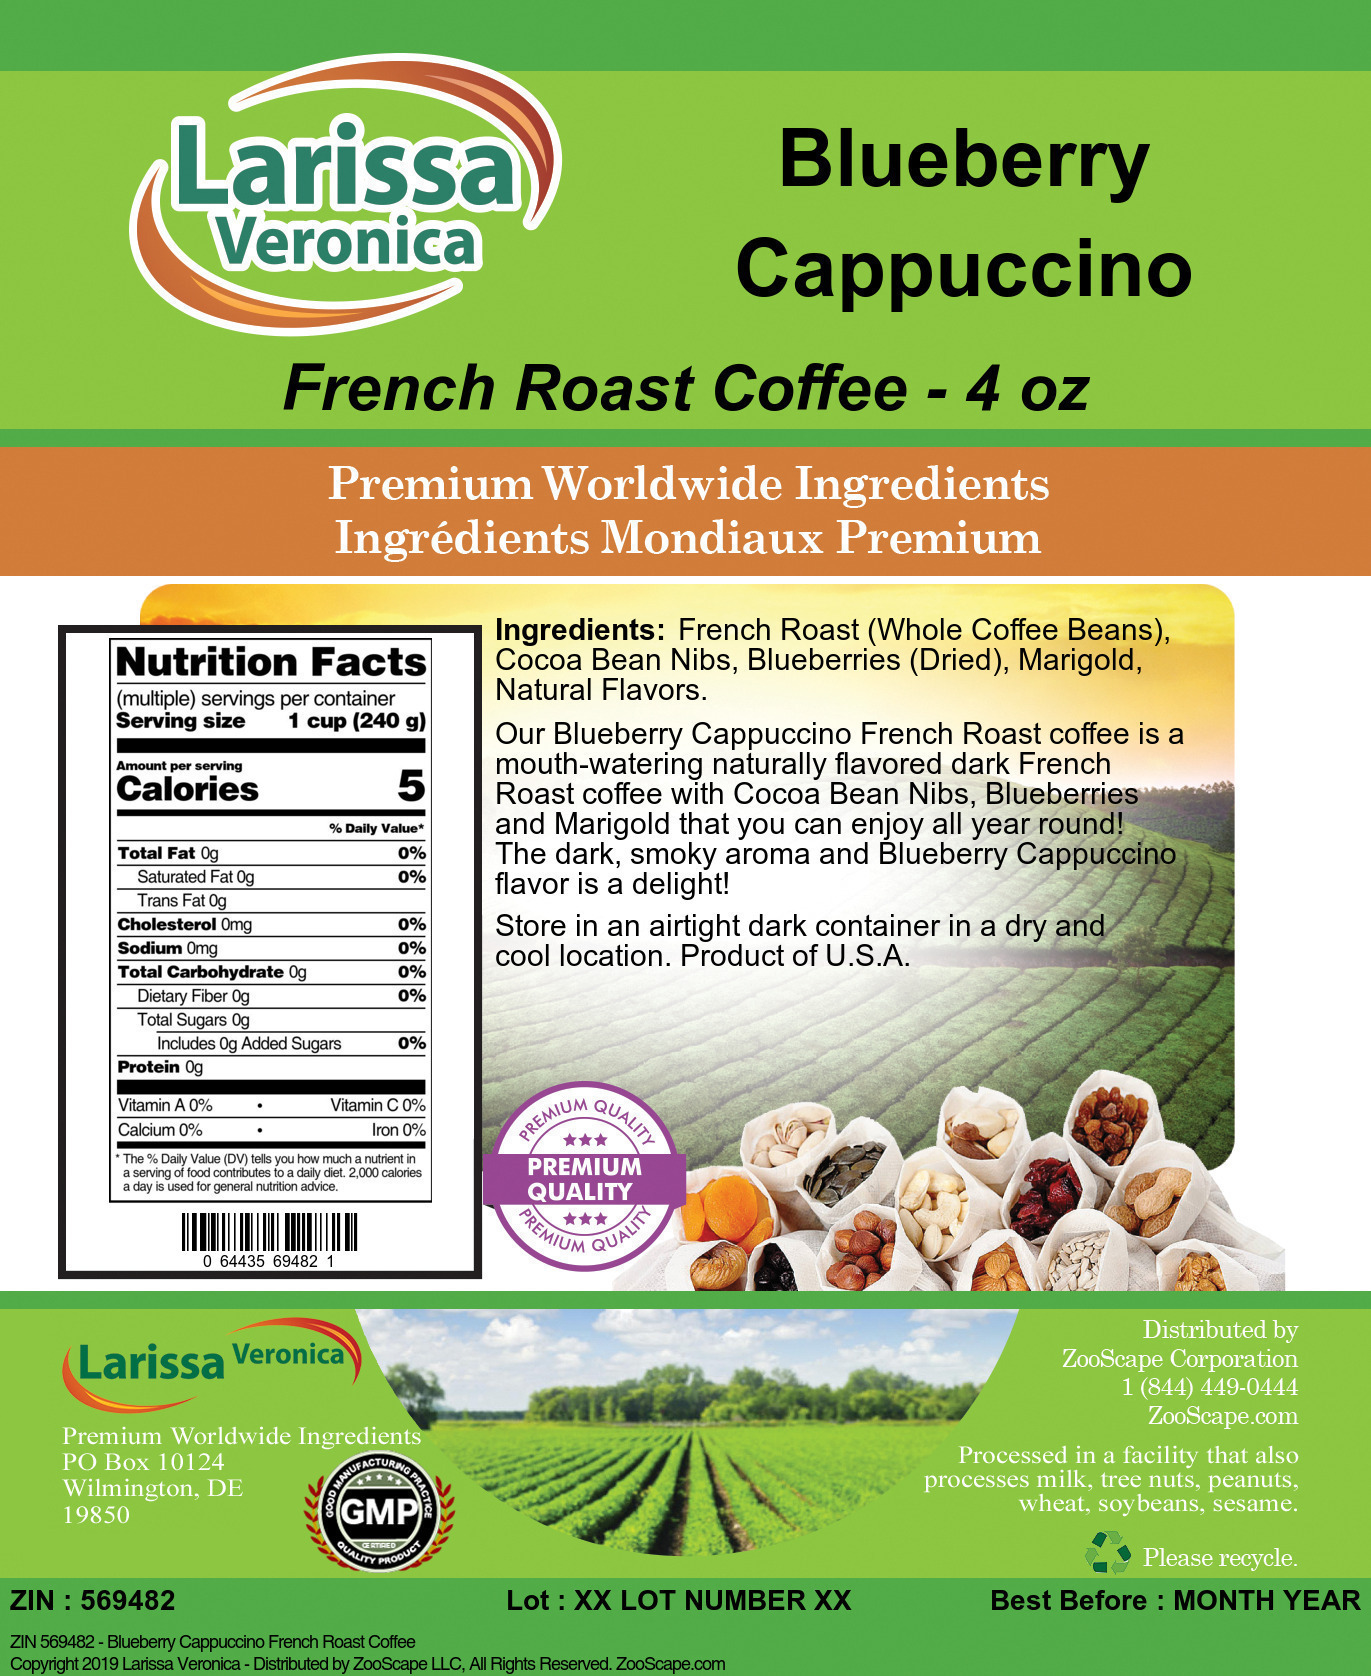 Blueberry Cappuccino French Roast Coffee - Label